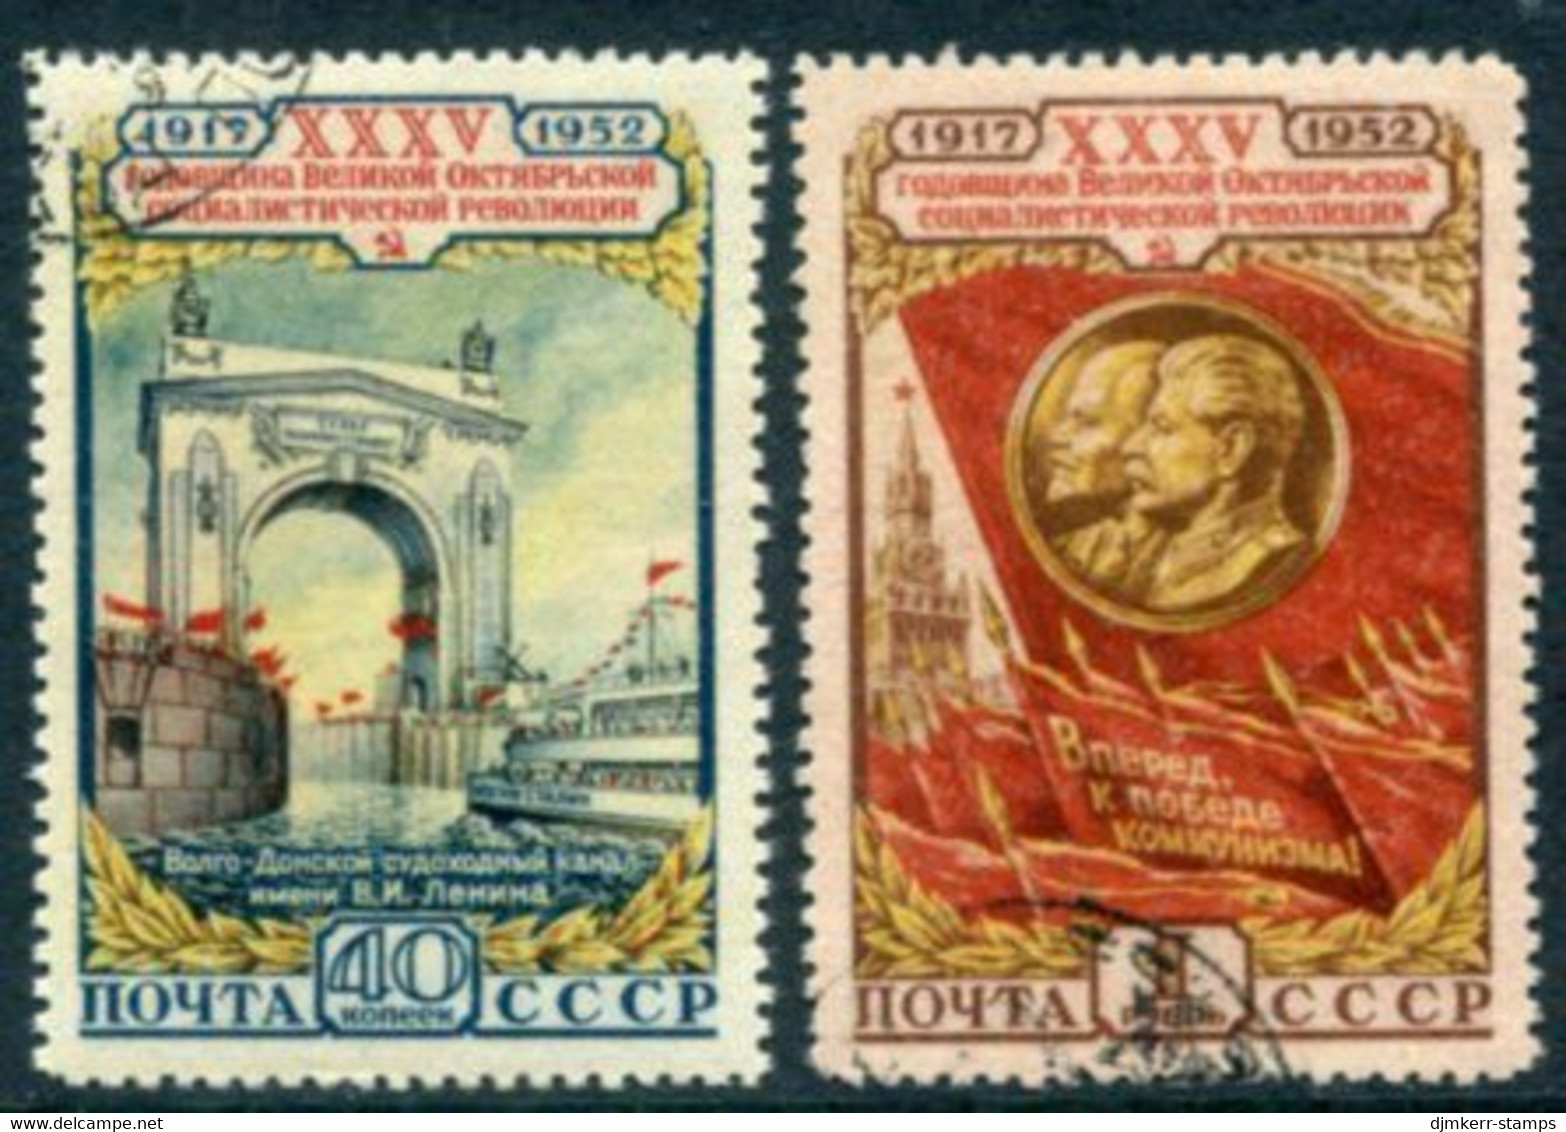 SOVIET UNION 1952 October Revolution  Anniversary Used.  Michel 1646-47 - Used Stamps